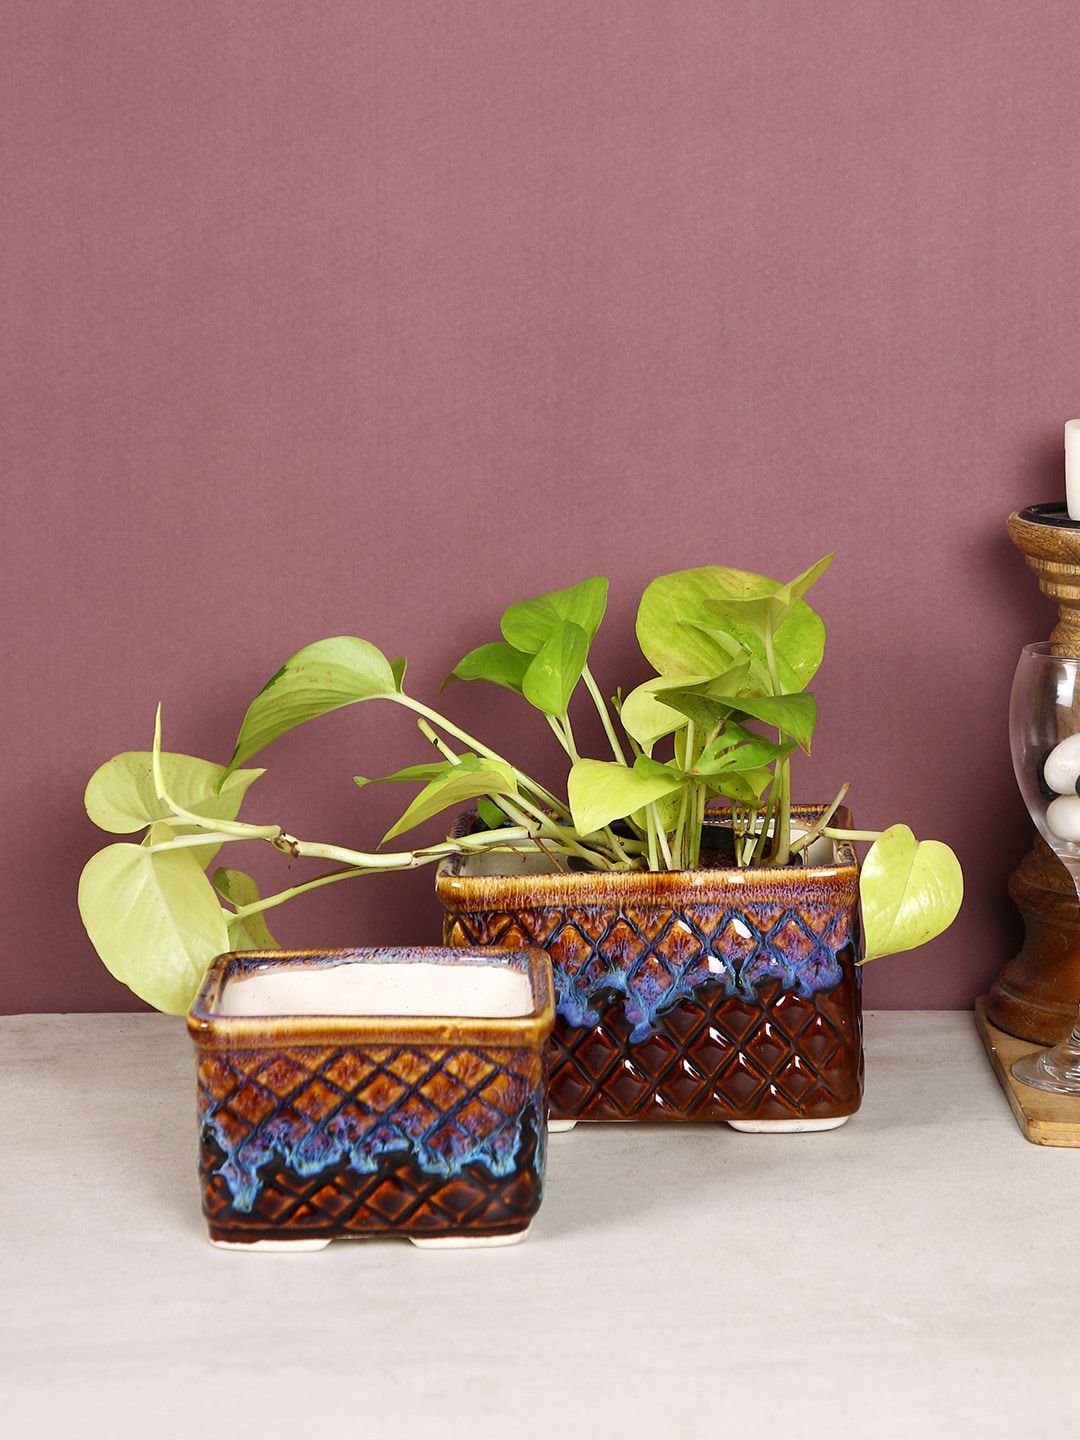 Aapno Rajasthan Set Of 2 Brown & Blue Textured Ceramic Box-Shaped Planters Price in India